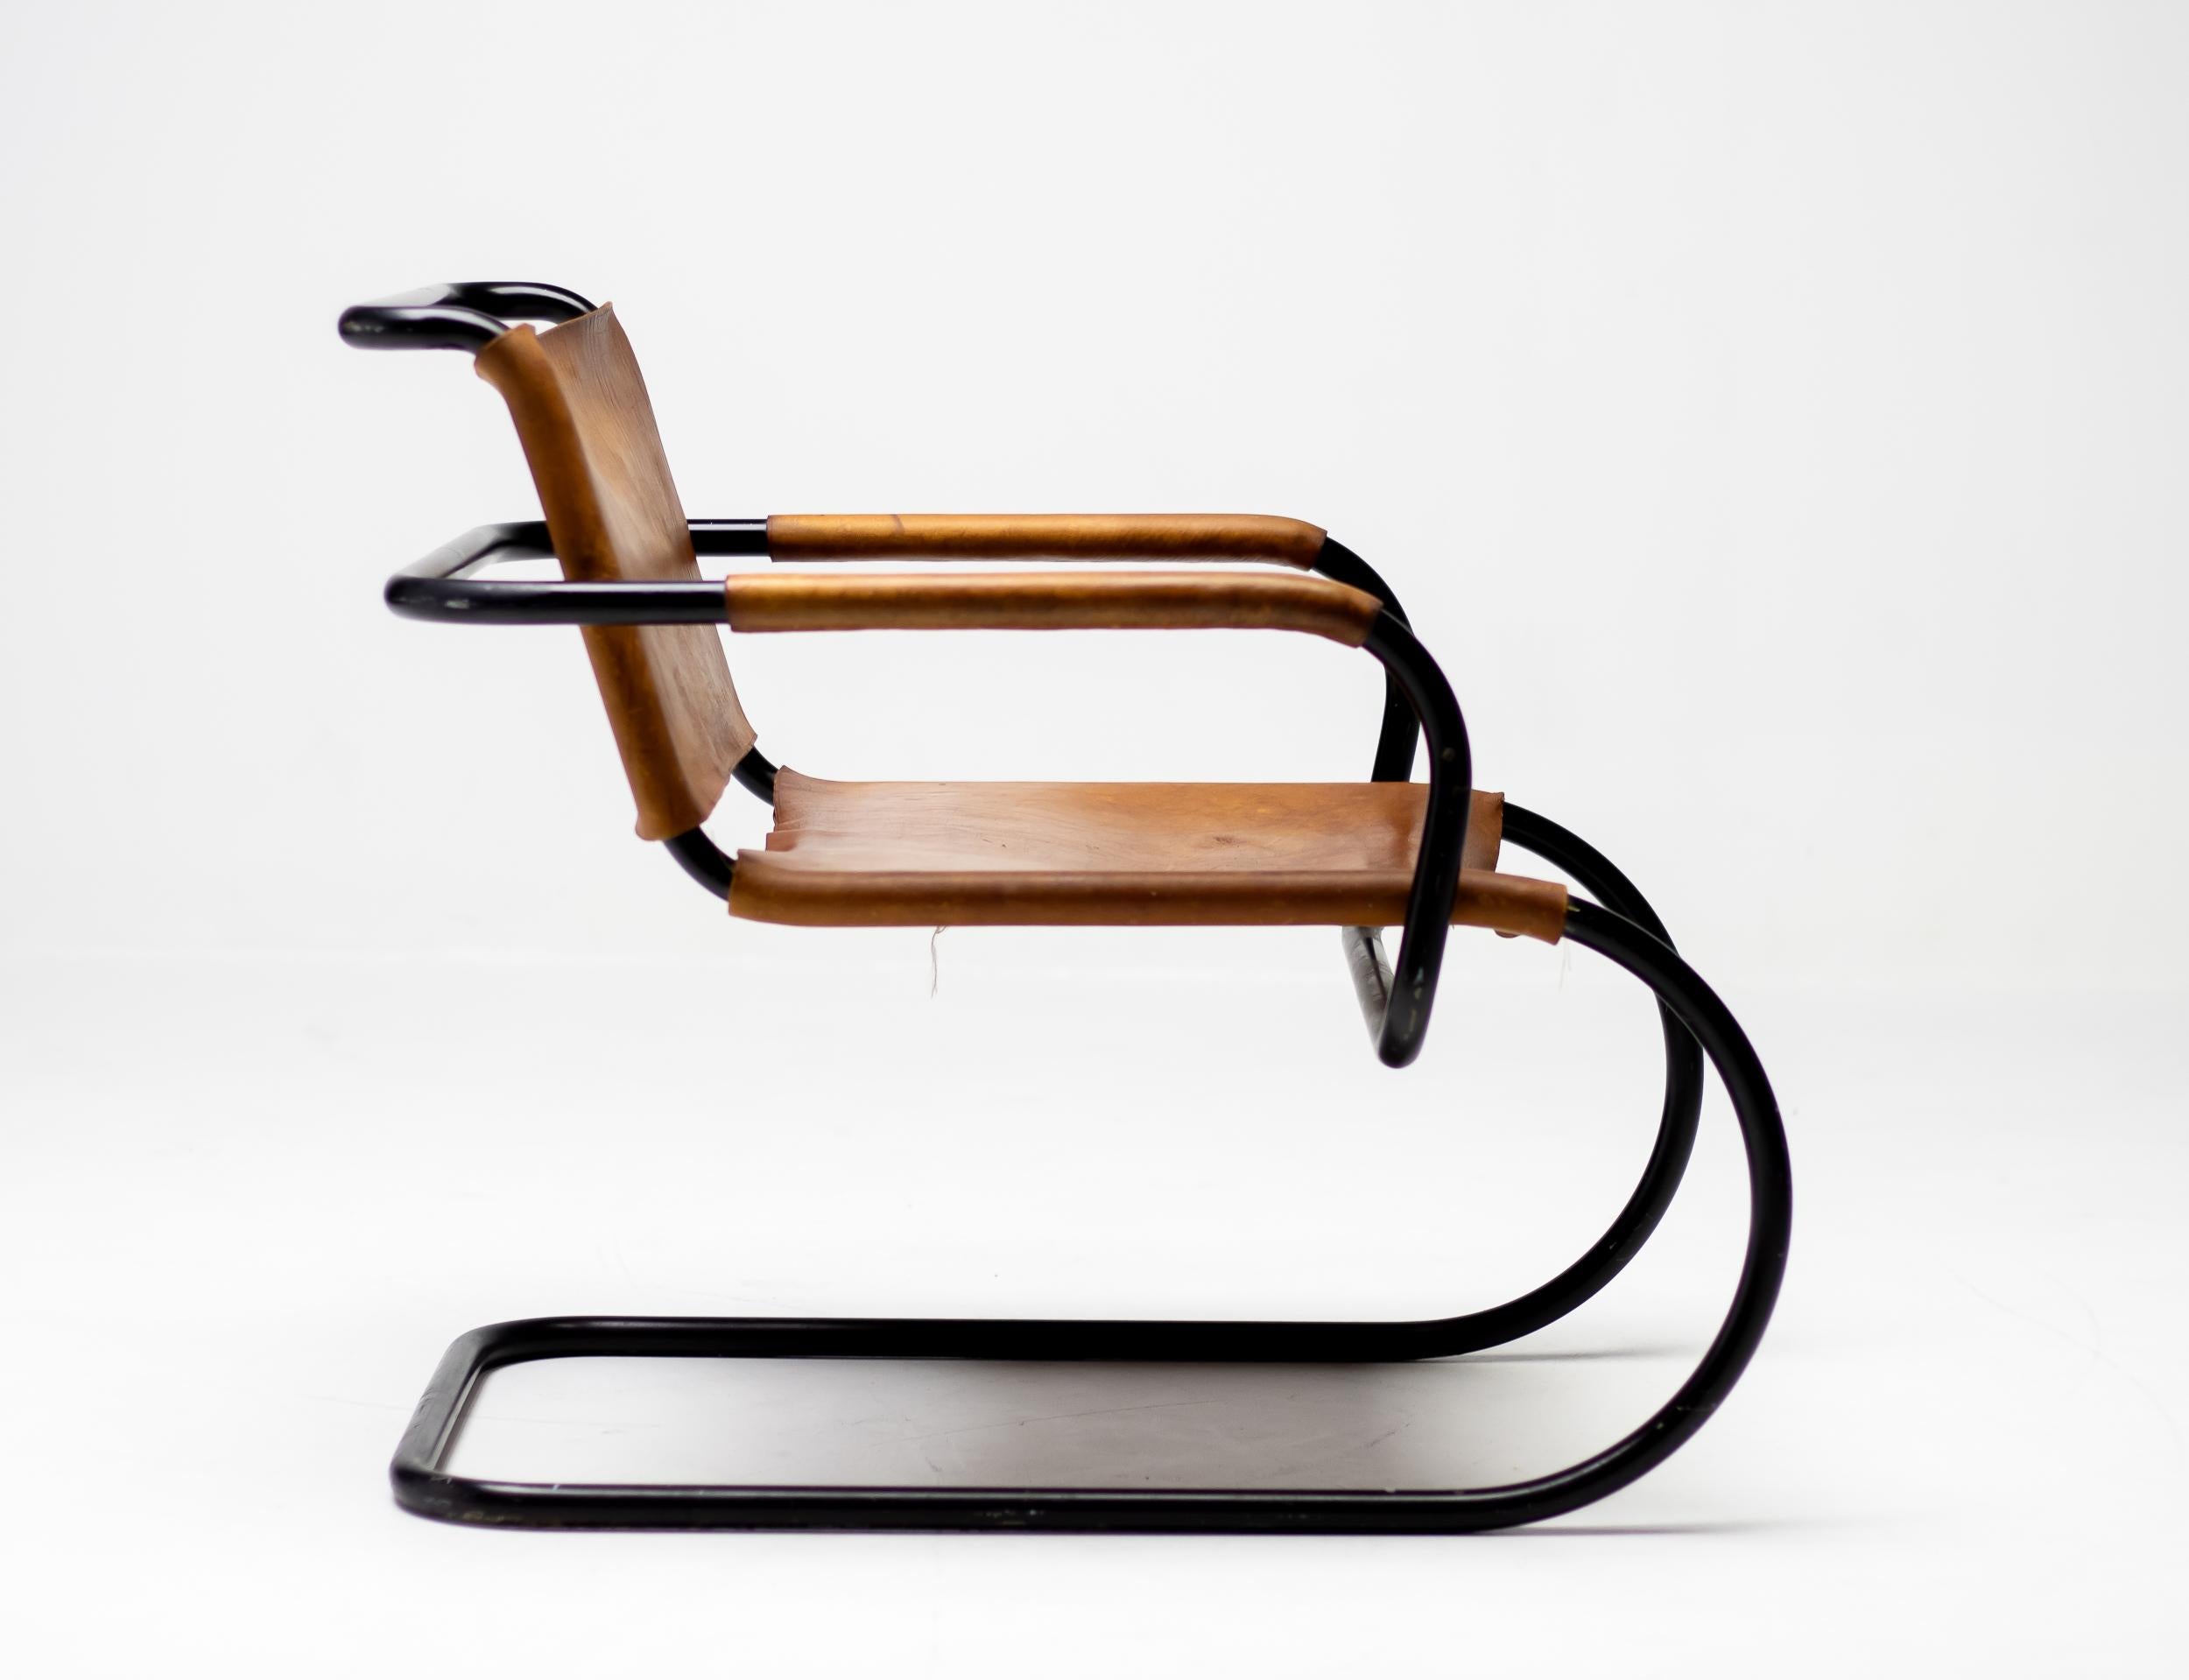 Tubular lounge chair designed by Franco Albini for the Triennale in Milan in 1933.
The original black enameled frame emphasizes the graphic qualities of this design.
The natural leather seat and back are still in nice, fully functional, vintage